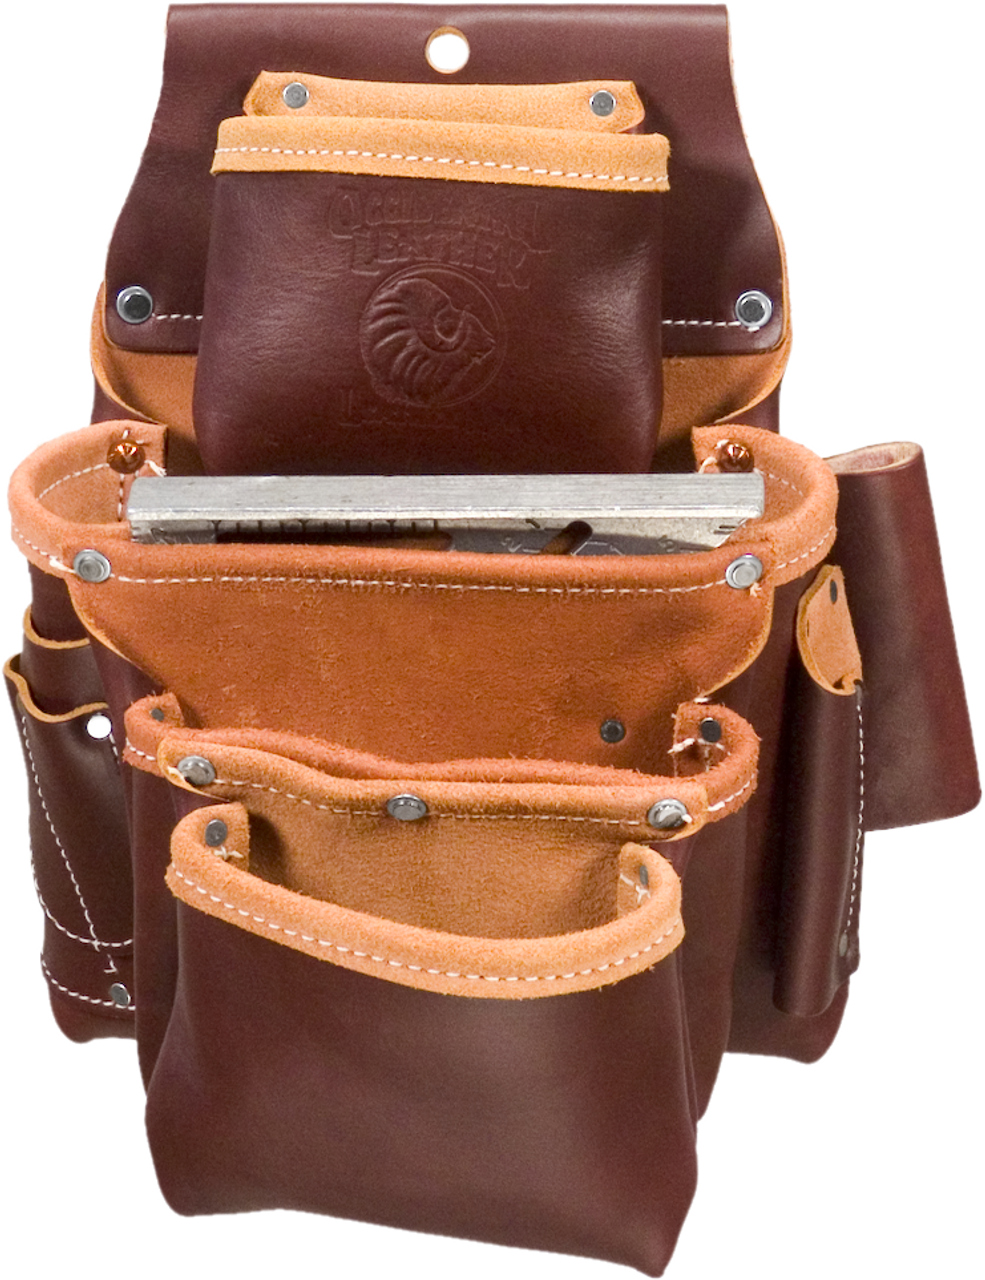 Occidental Leather OCC-5062 Pouch Pro Fastener Bag Atlas-Machinery